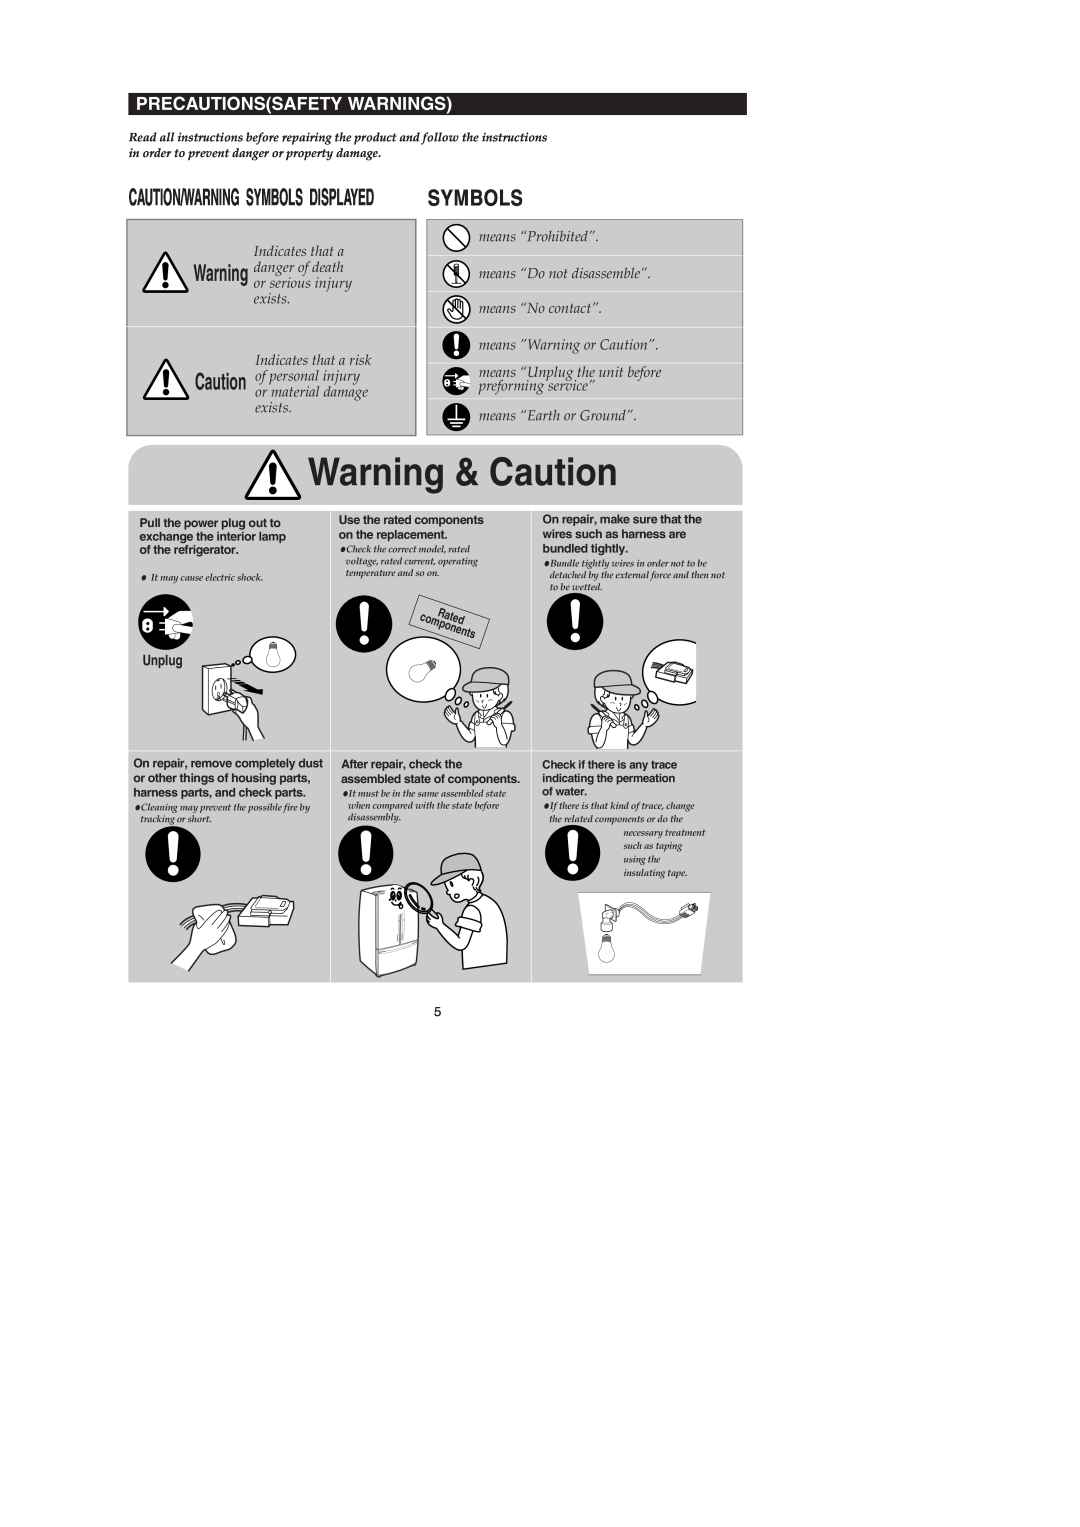 Samsung RF267AERS Precautionssafety Warnings, Warning & Caution, Caution/Warning Symbols Displayed, Indicates that a 